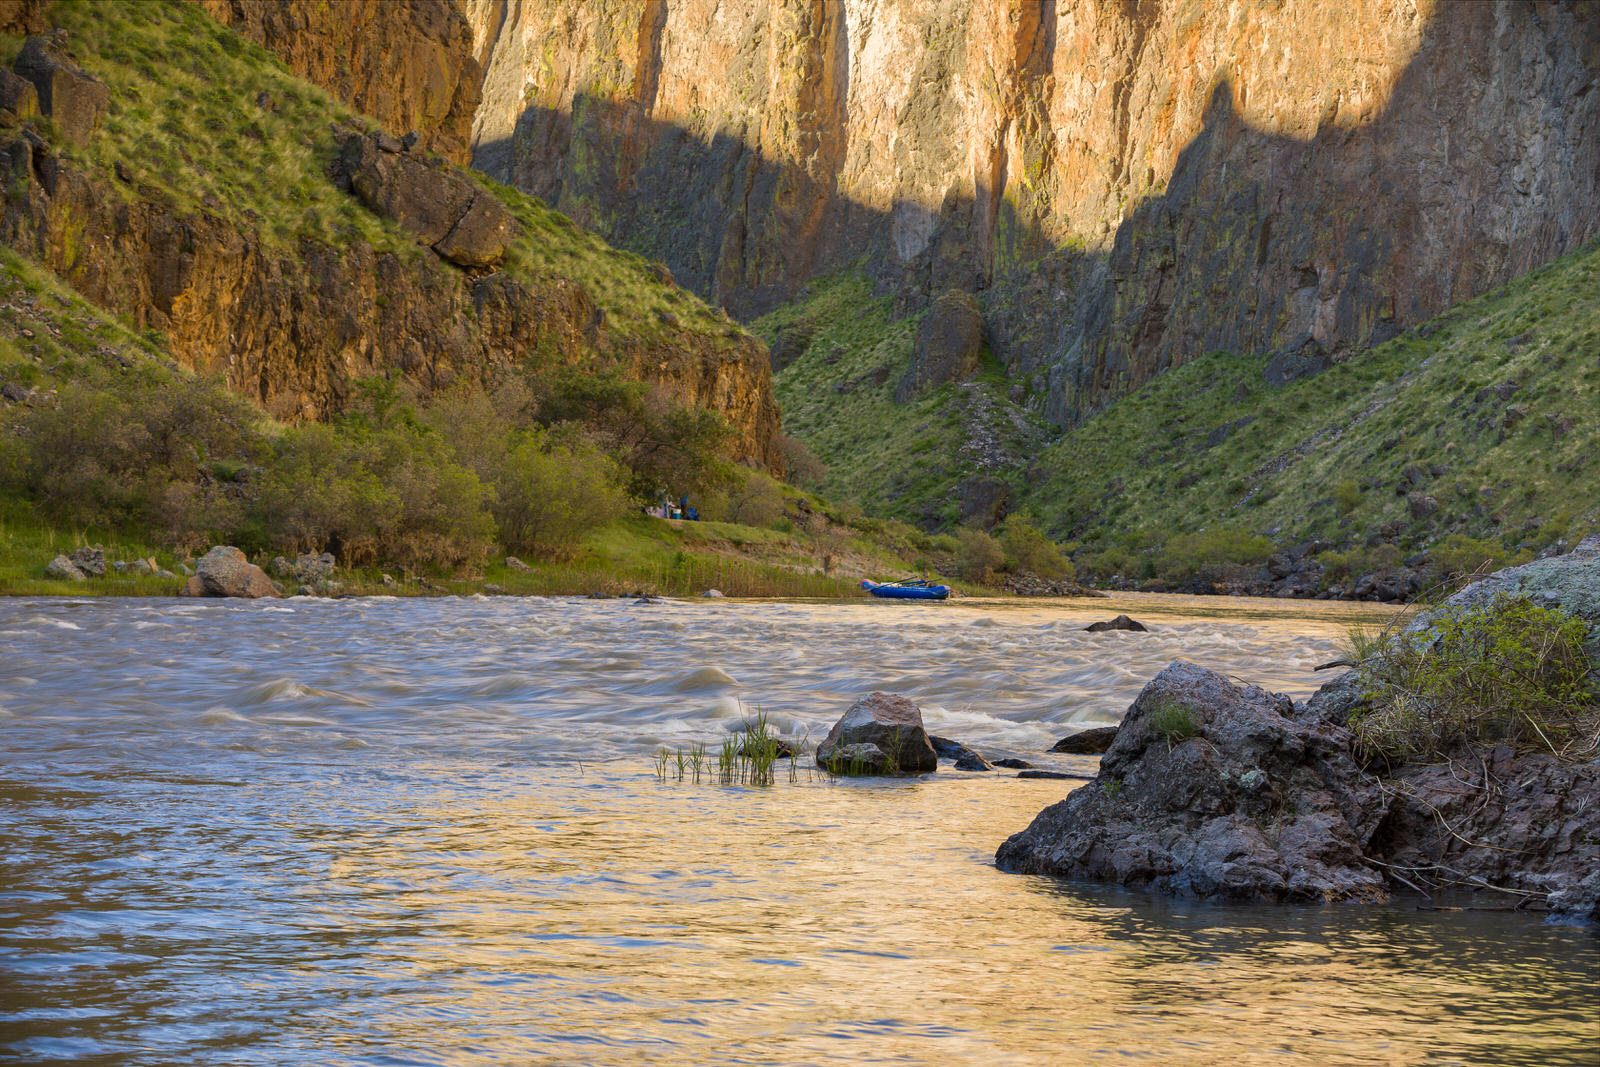  Morning light at Cliffside camp on the Owyhee River 